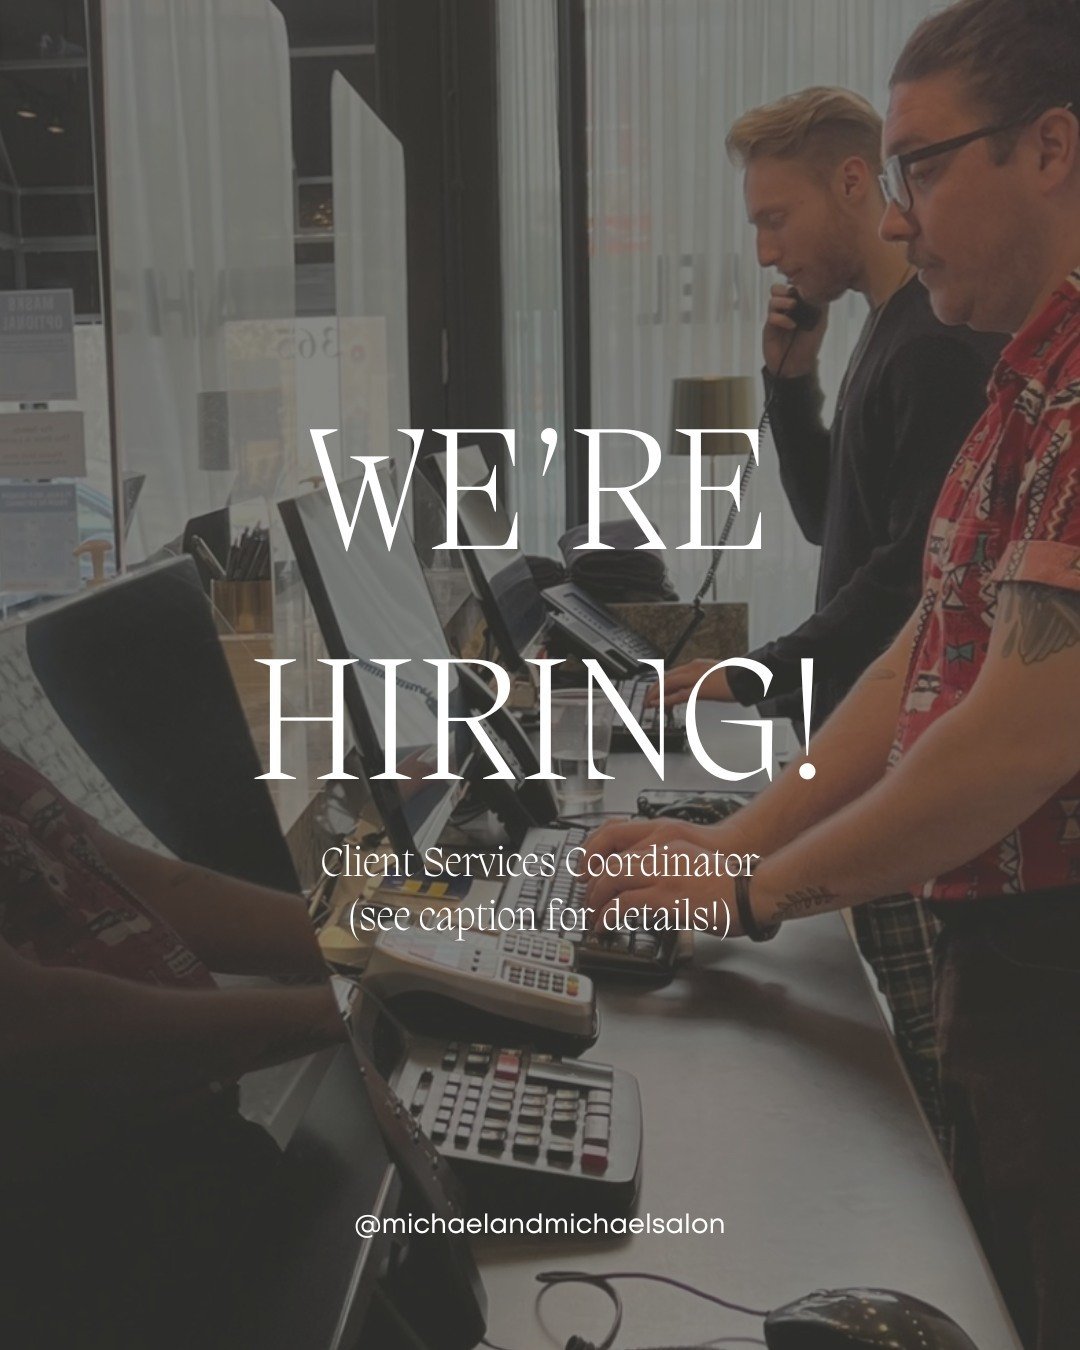 MICHAEL &amp; MICHAEL SALON is looking for a Client Services Coordinator to join our successful team!⁠
⁠
THE PERSON WE ARE LOOKING FOR: ⁠
Must be energetic, cheerful, resourceful, professional, fashion savvy, able to work independently and as part of